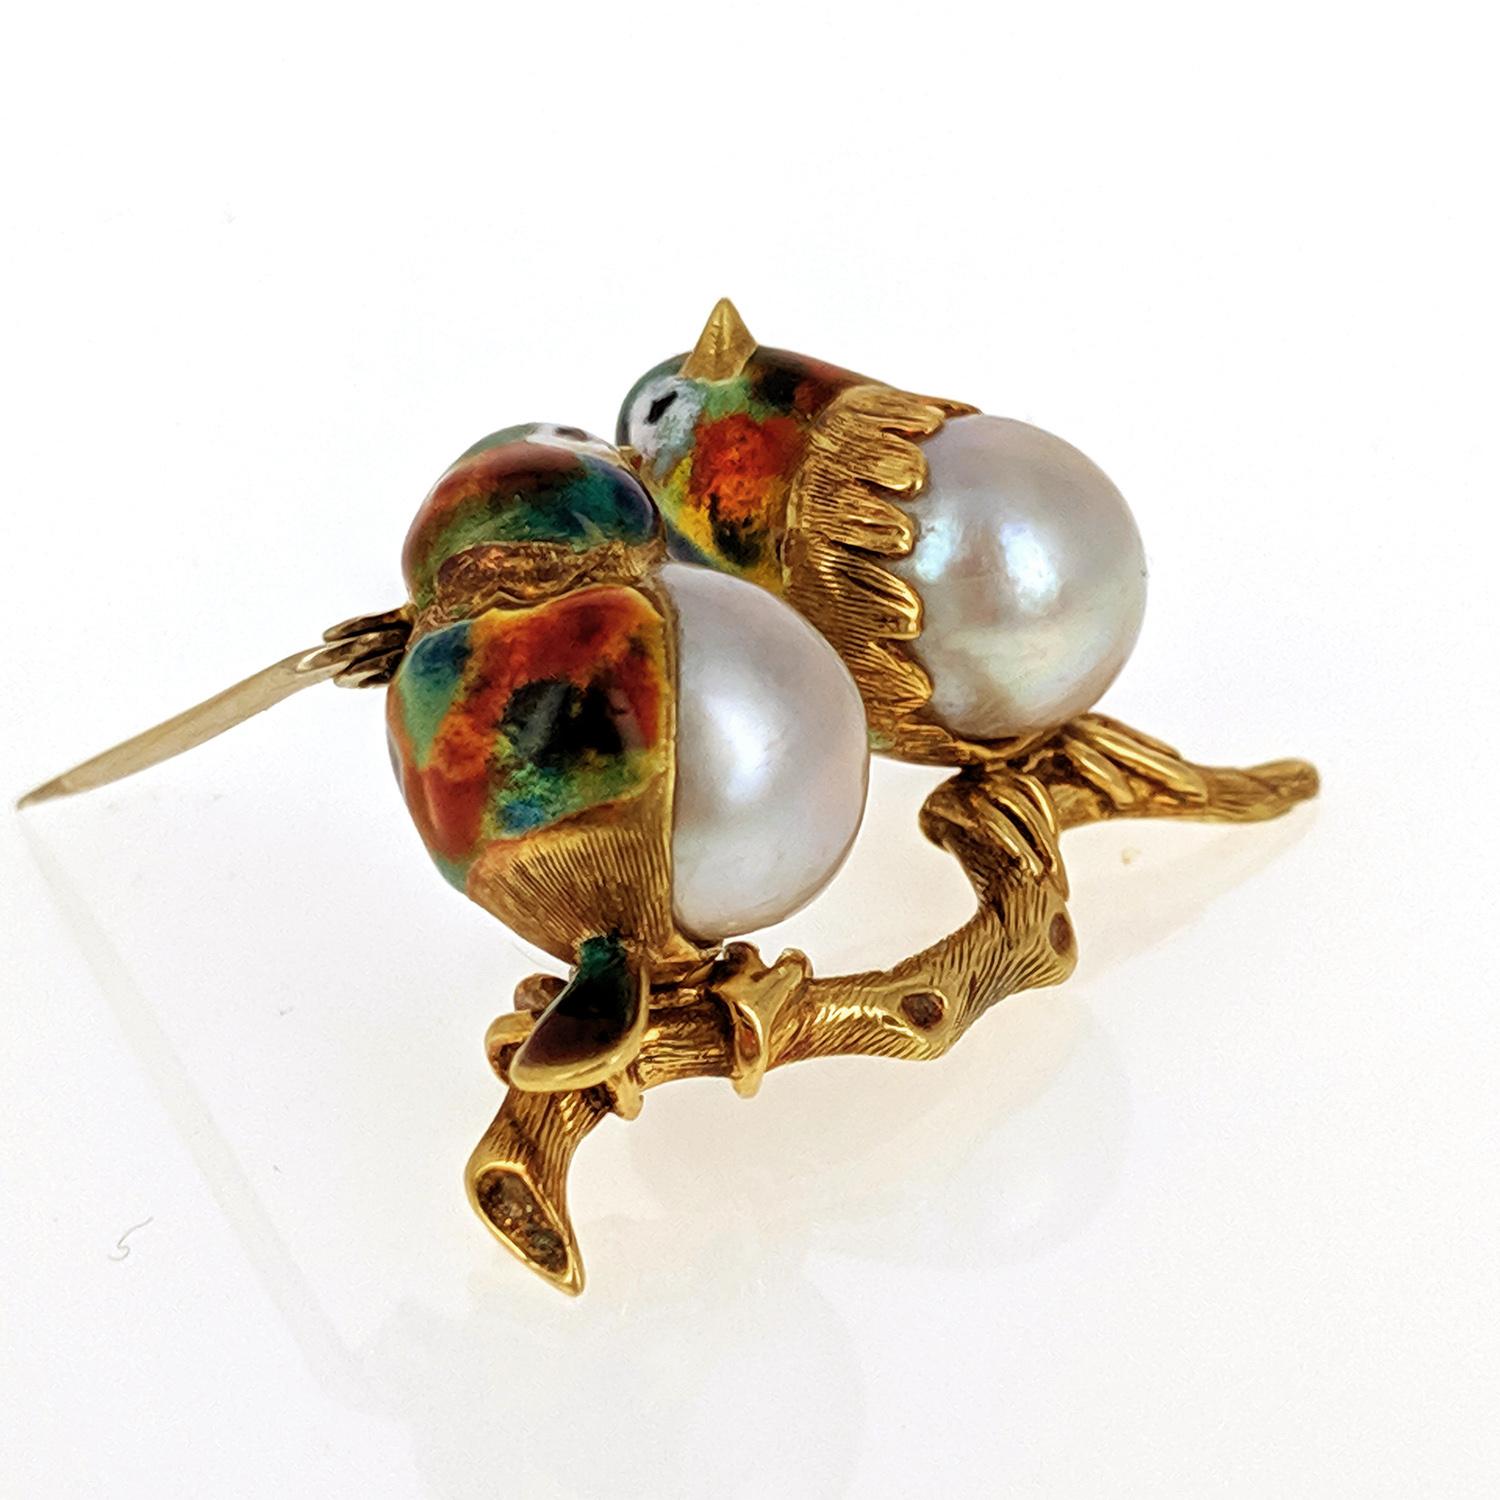 This sweet pin brooch was designed as two lovebirds perched on a branch with white pearl bodices and accented with multi-colored enamel. It is mounted in 18 karat yellow gold.